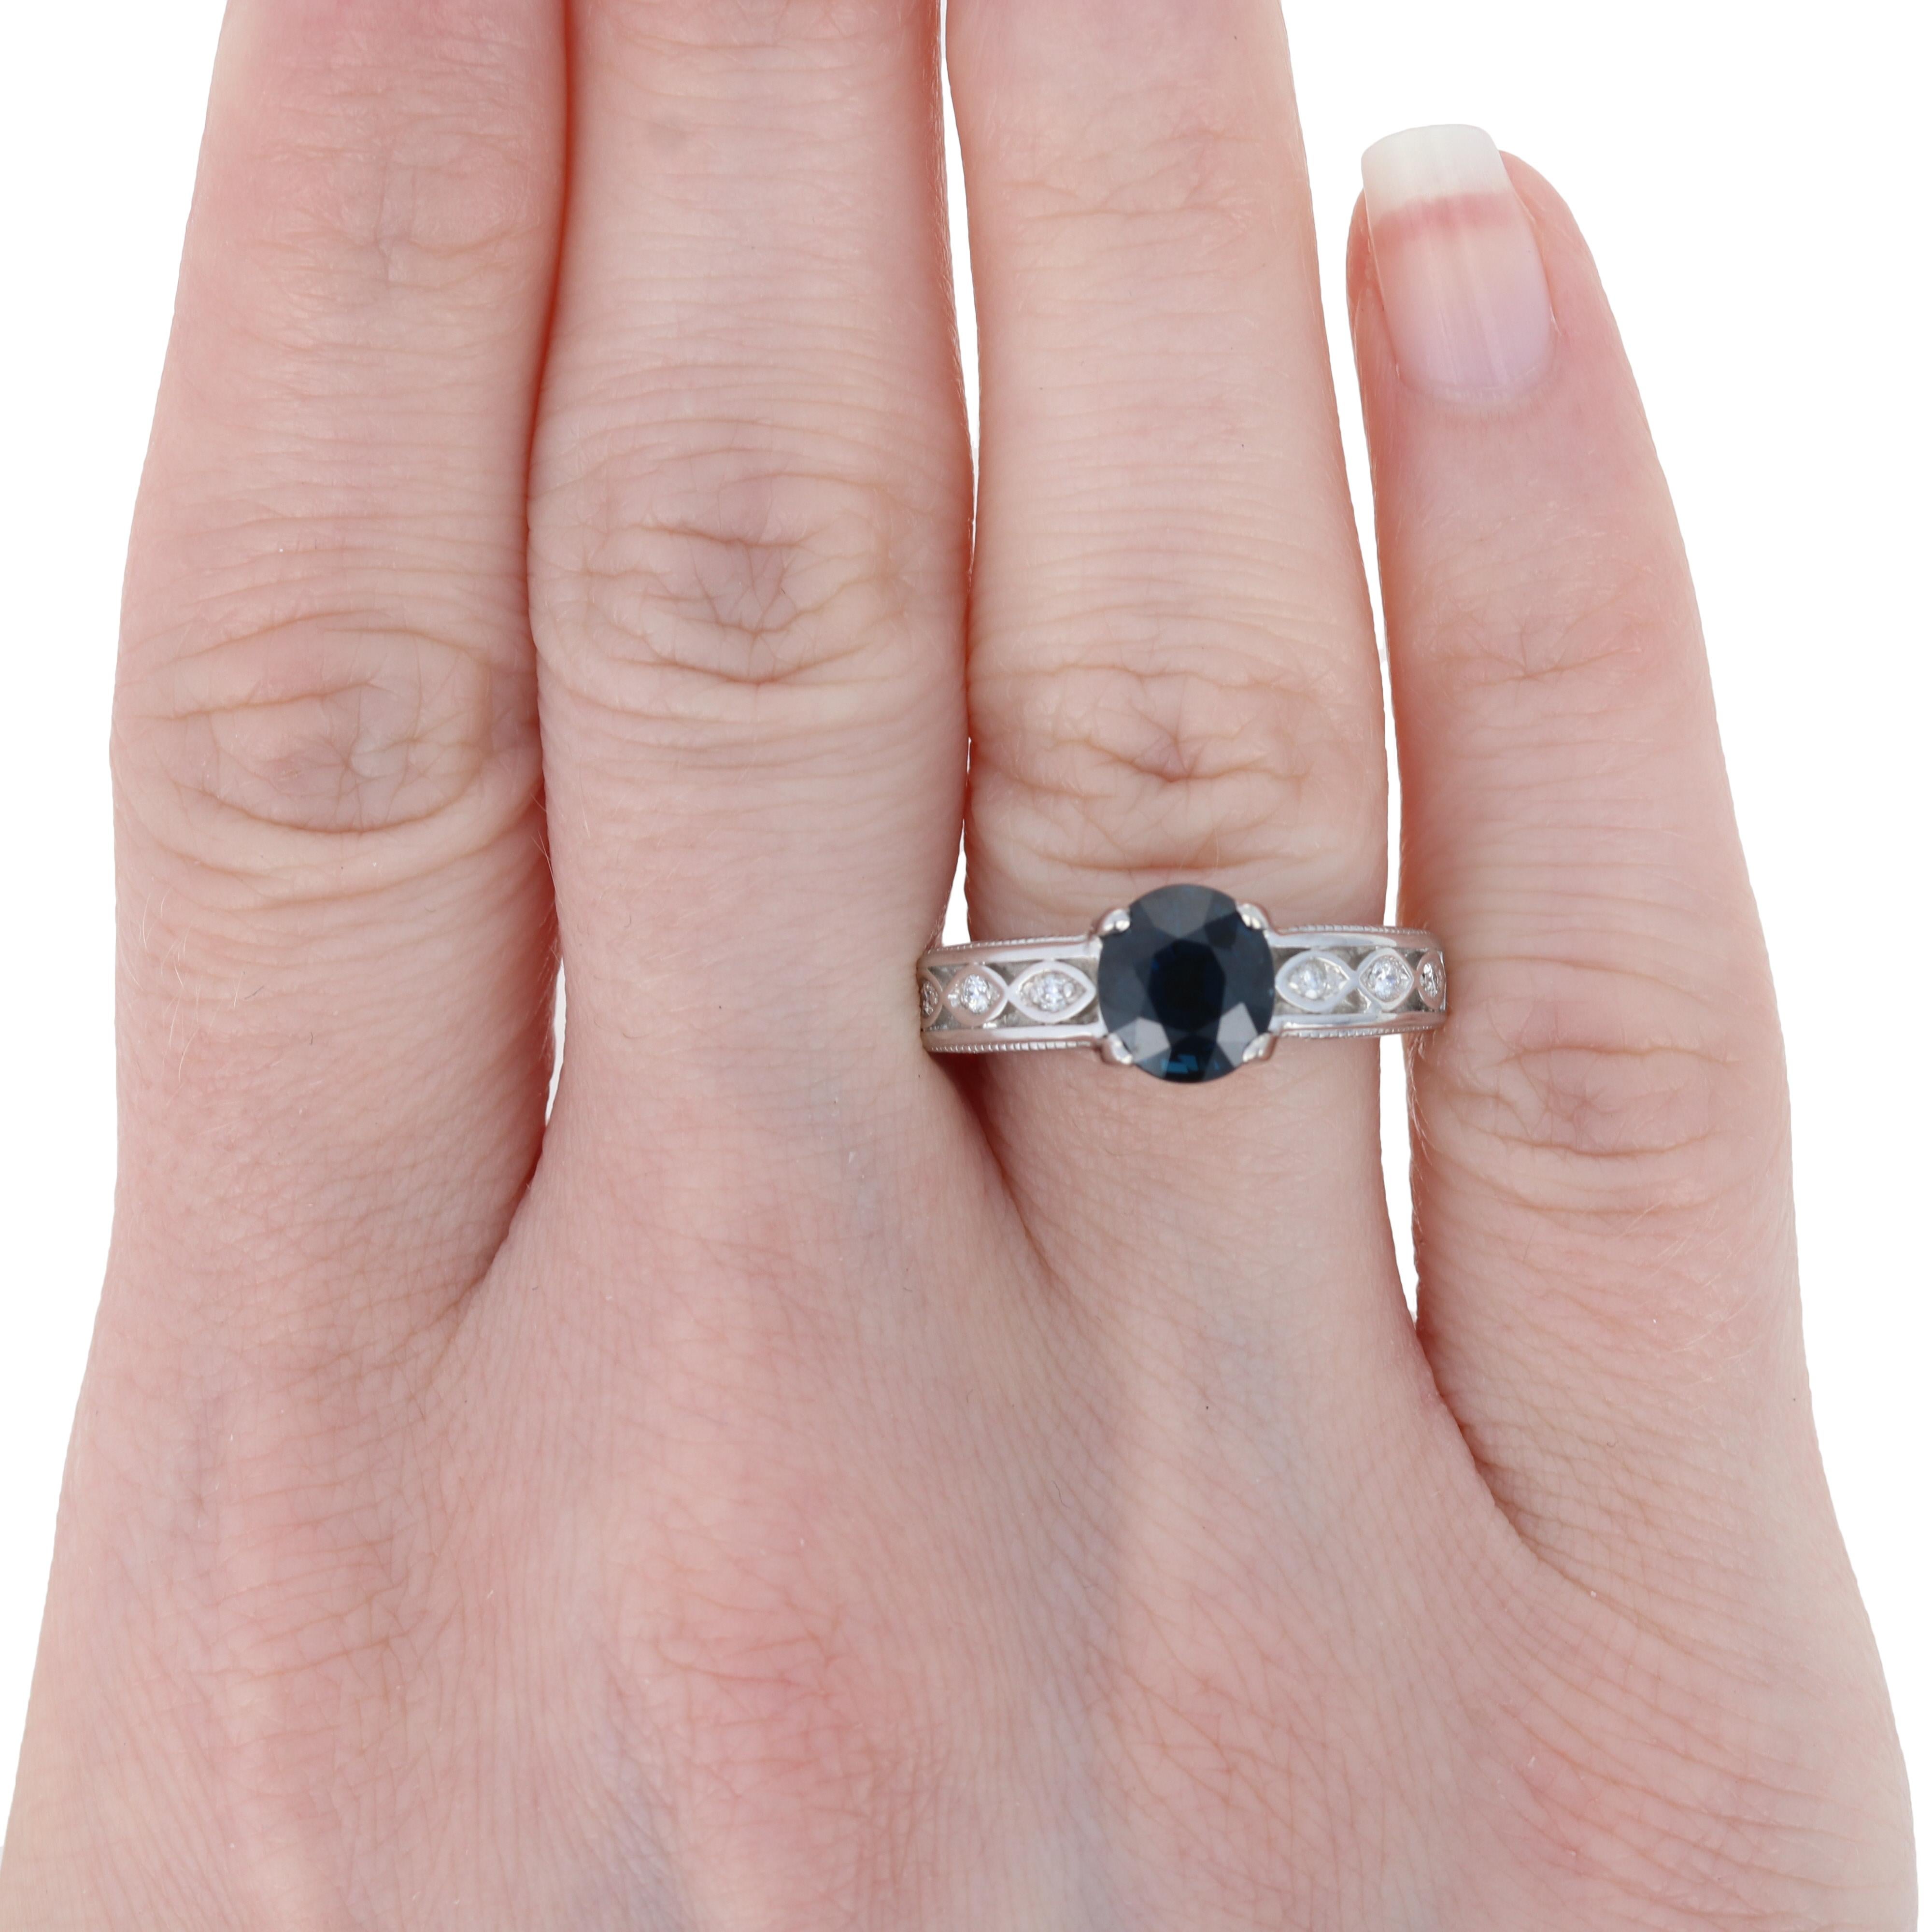 This gorgeous engagement ring if the perfect choice for the bride who dreams of 